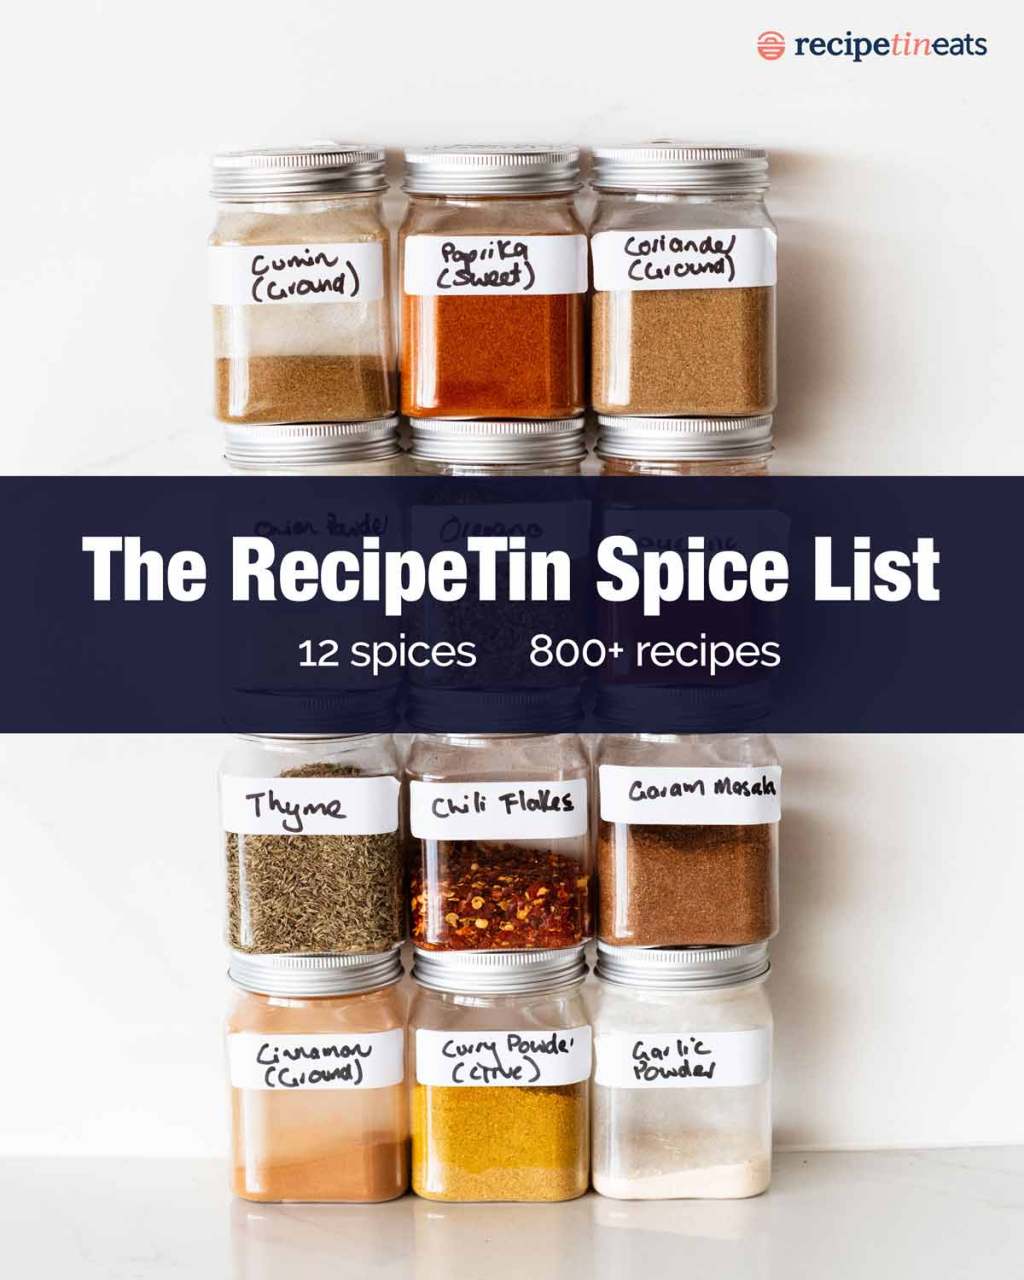 https://www.recipetineats.com/wp-content/uploads/2022/09/RecipeTin-most-used-spices-lead-graphic-1.jpg?w=1024